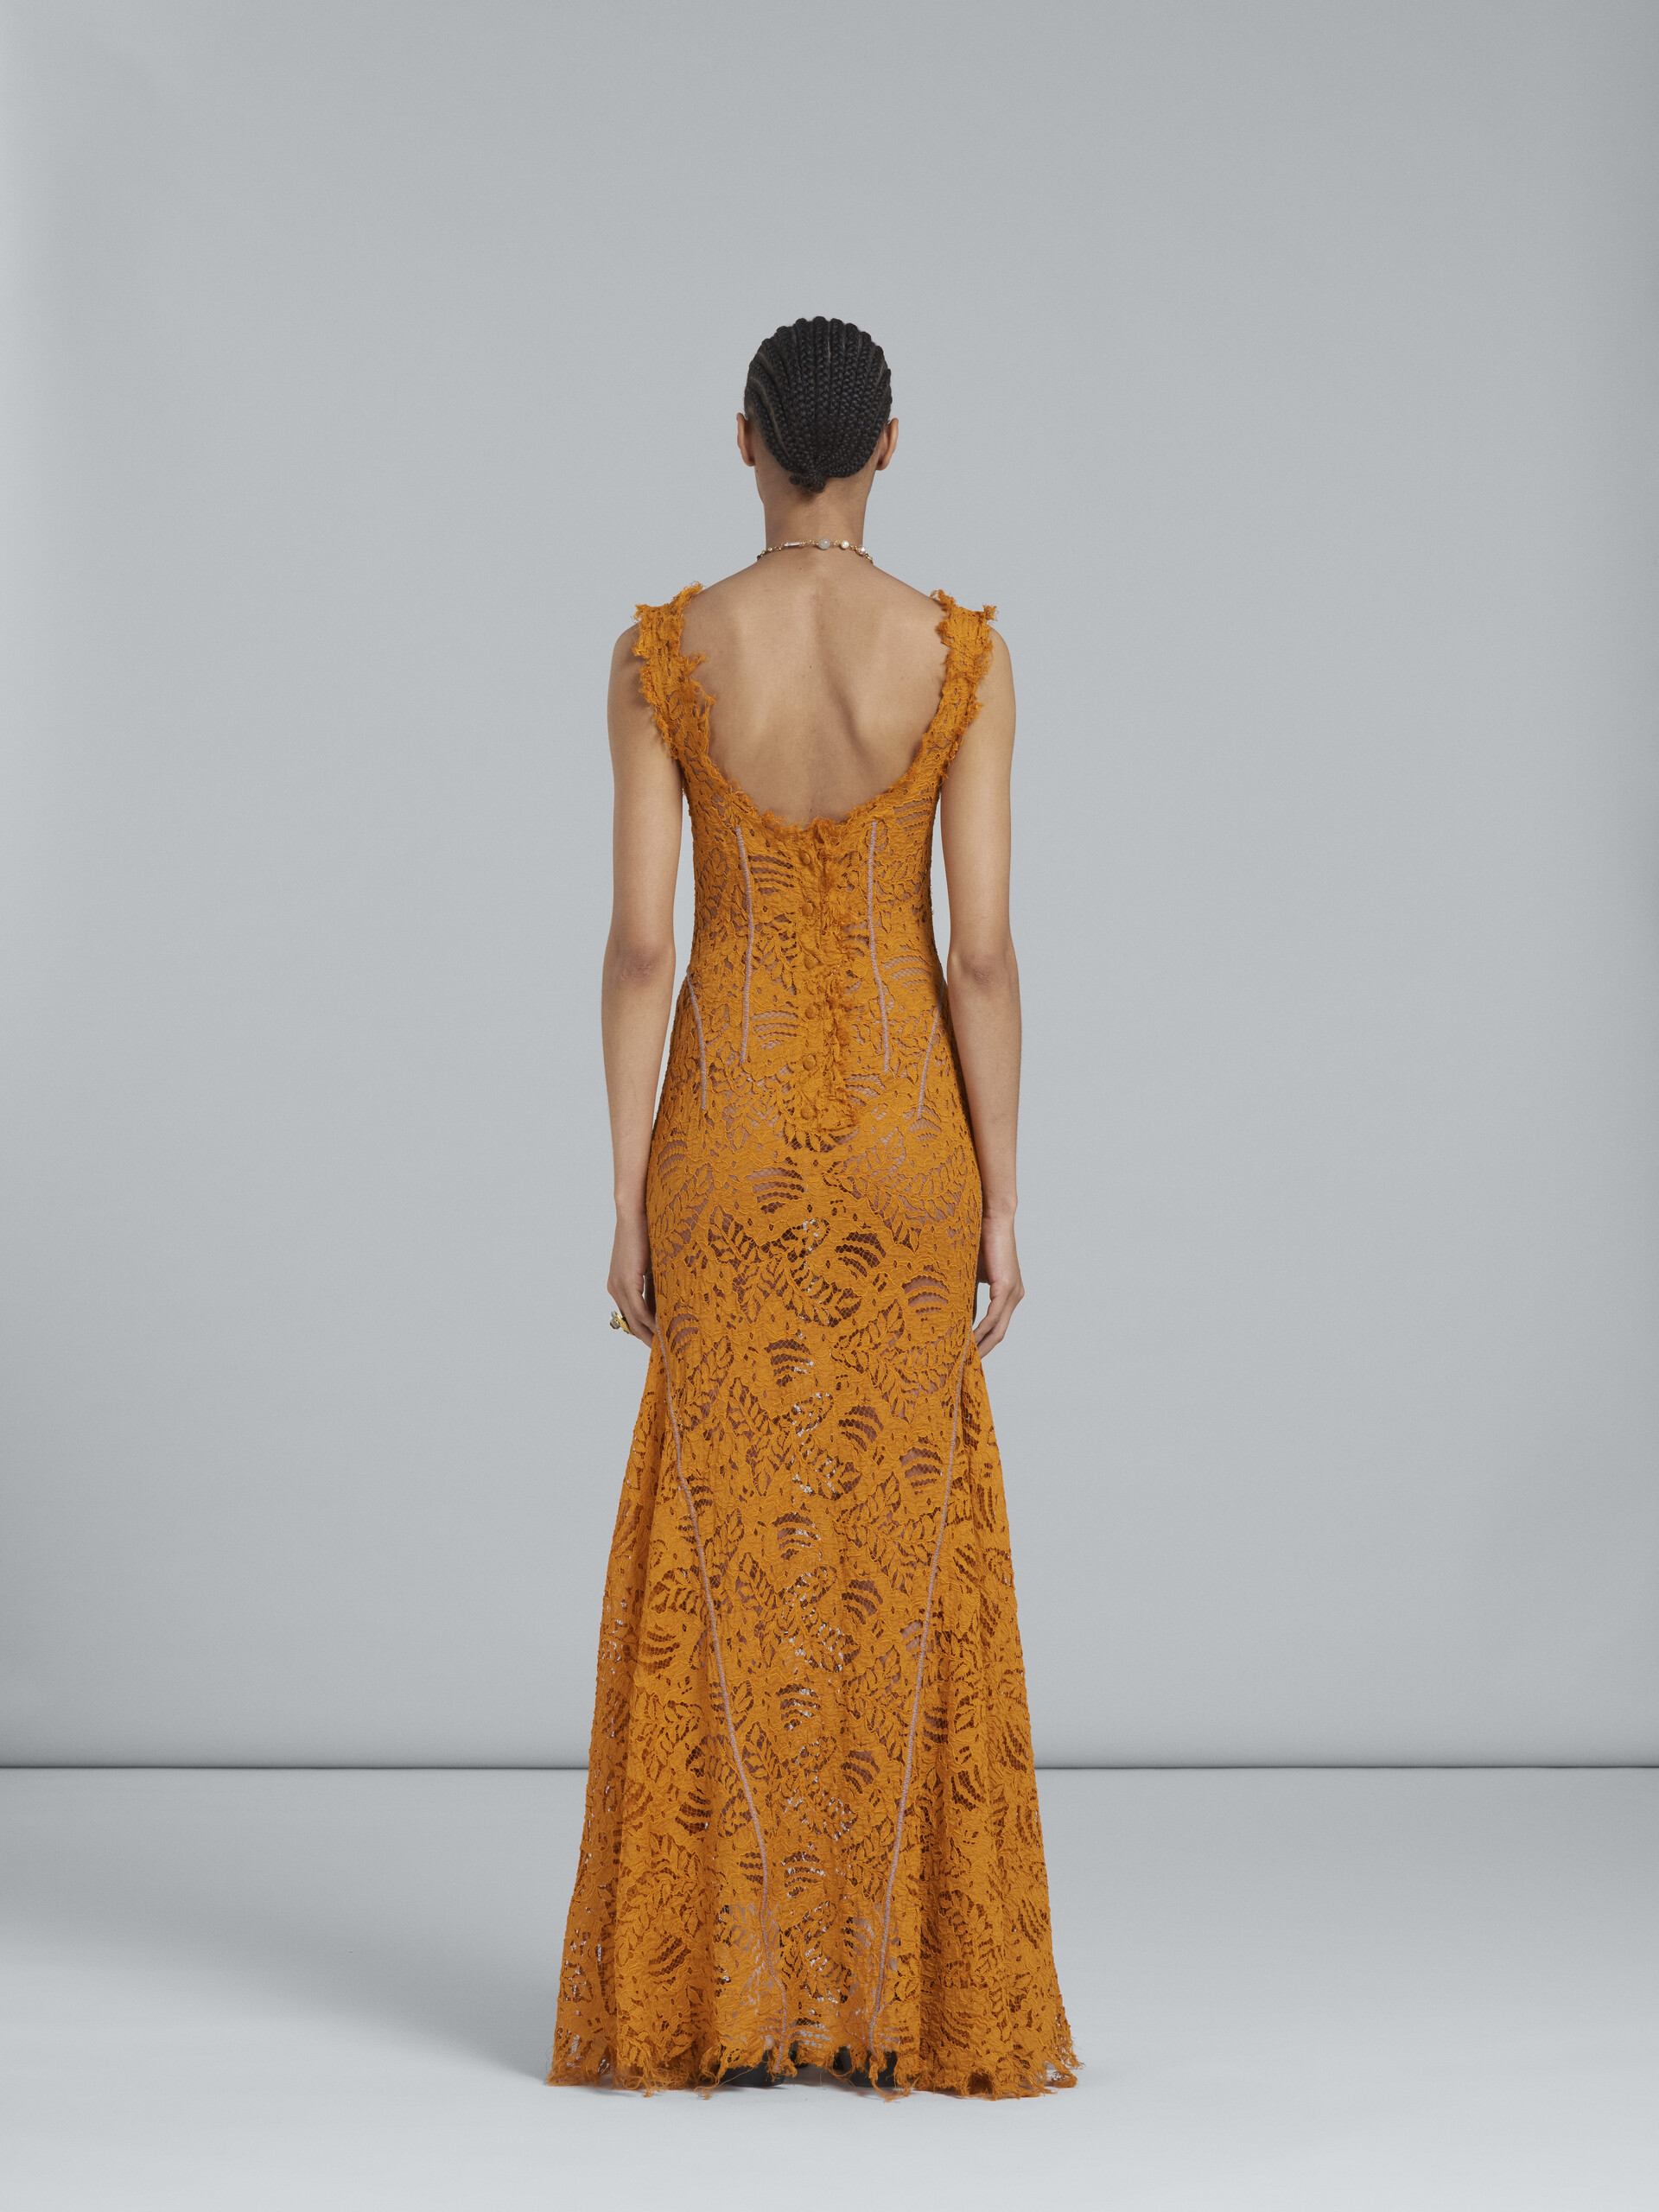 Long dress in gold-tone lace - Dresses - Image 3